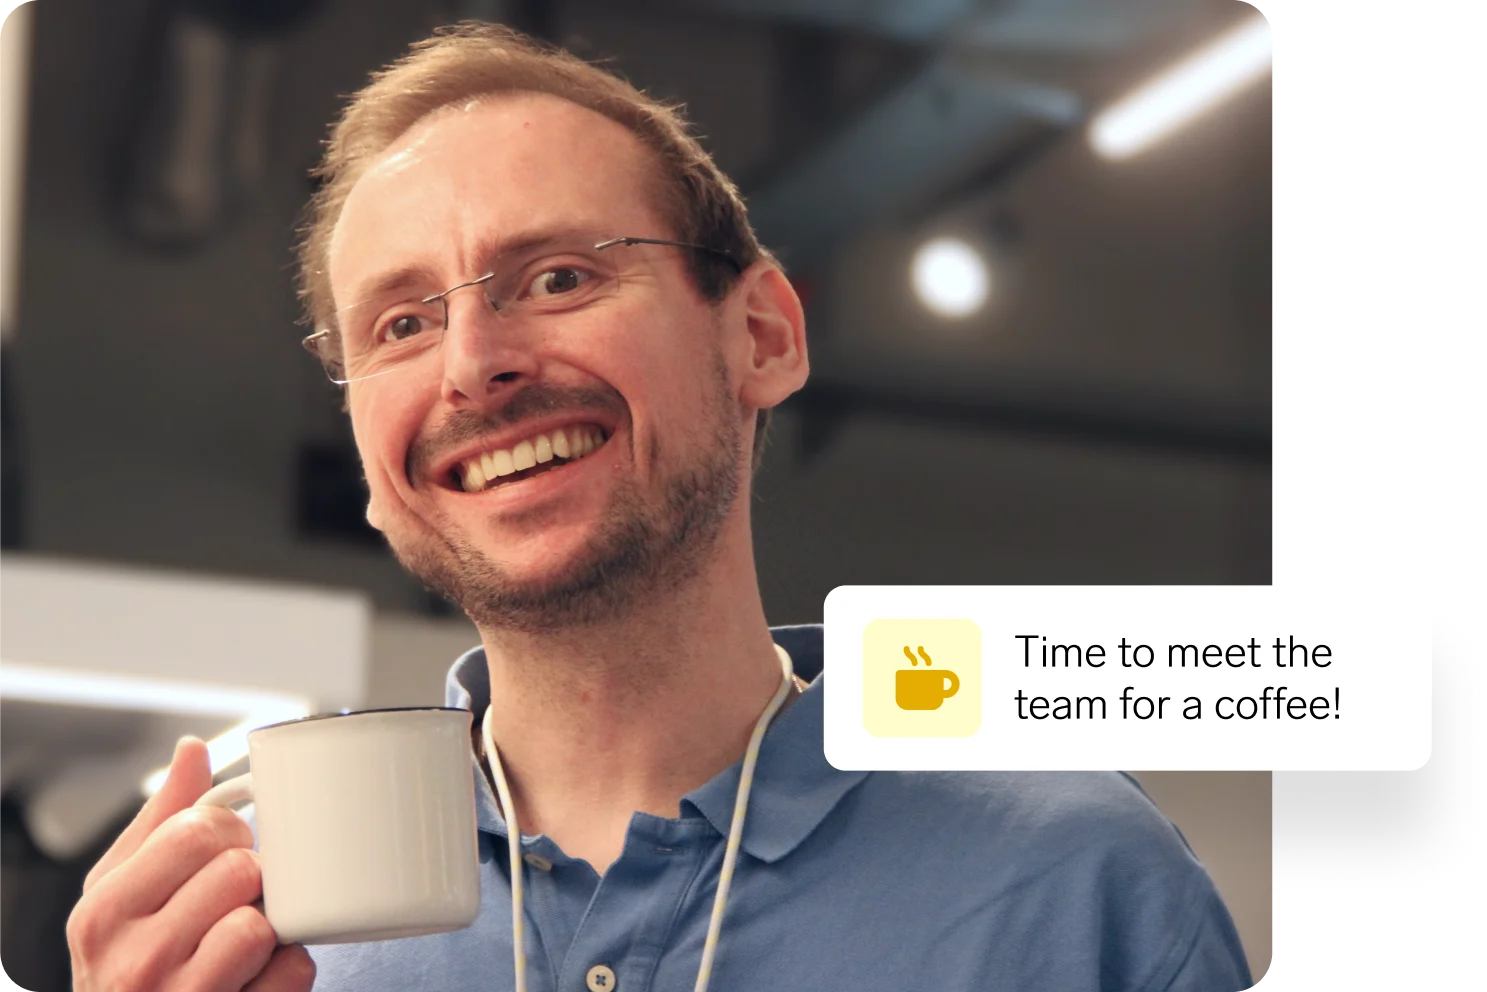 Man in Data smiling while holding a coffee mug